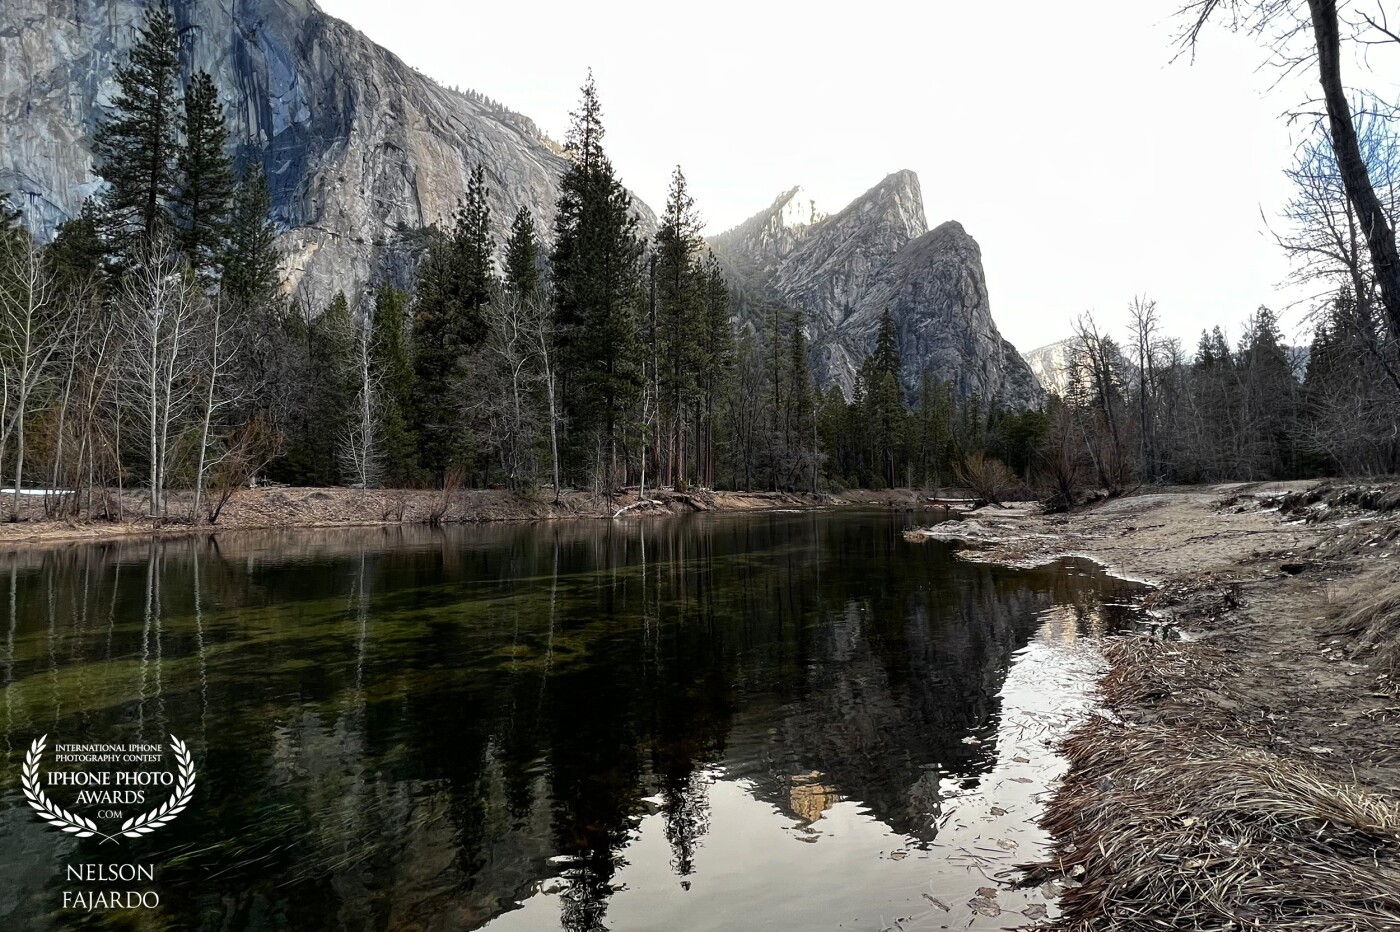 This was taken inside the Yosemite park with (what I call) the bear claw or the three brothers rock with the reflection from the river.